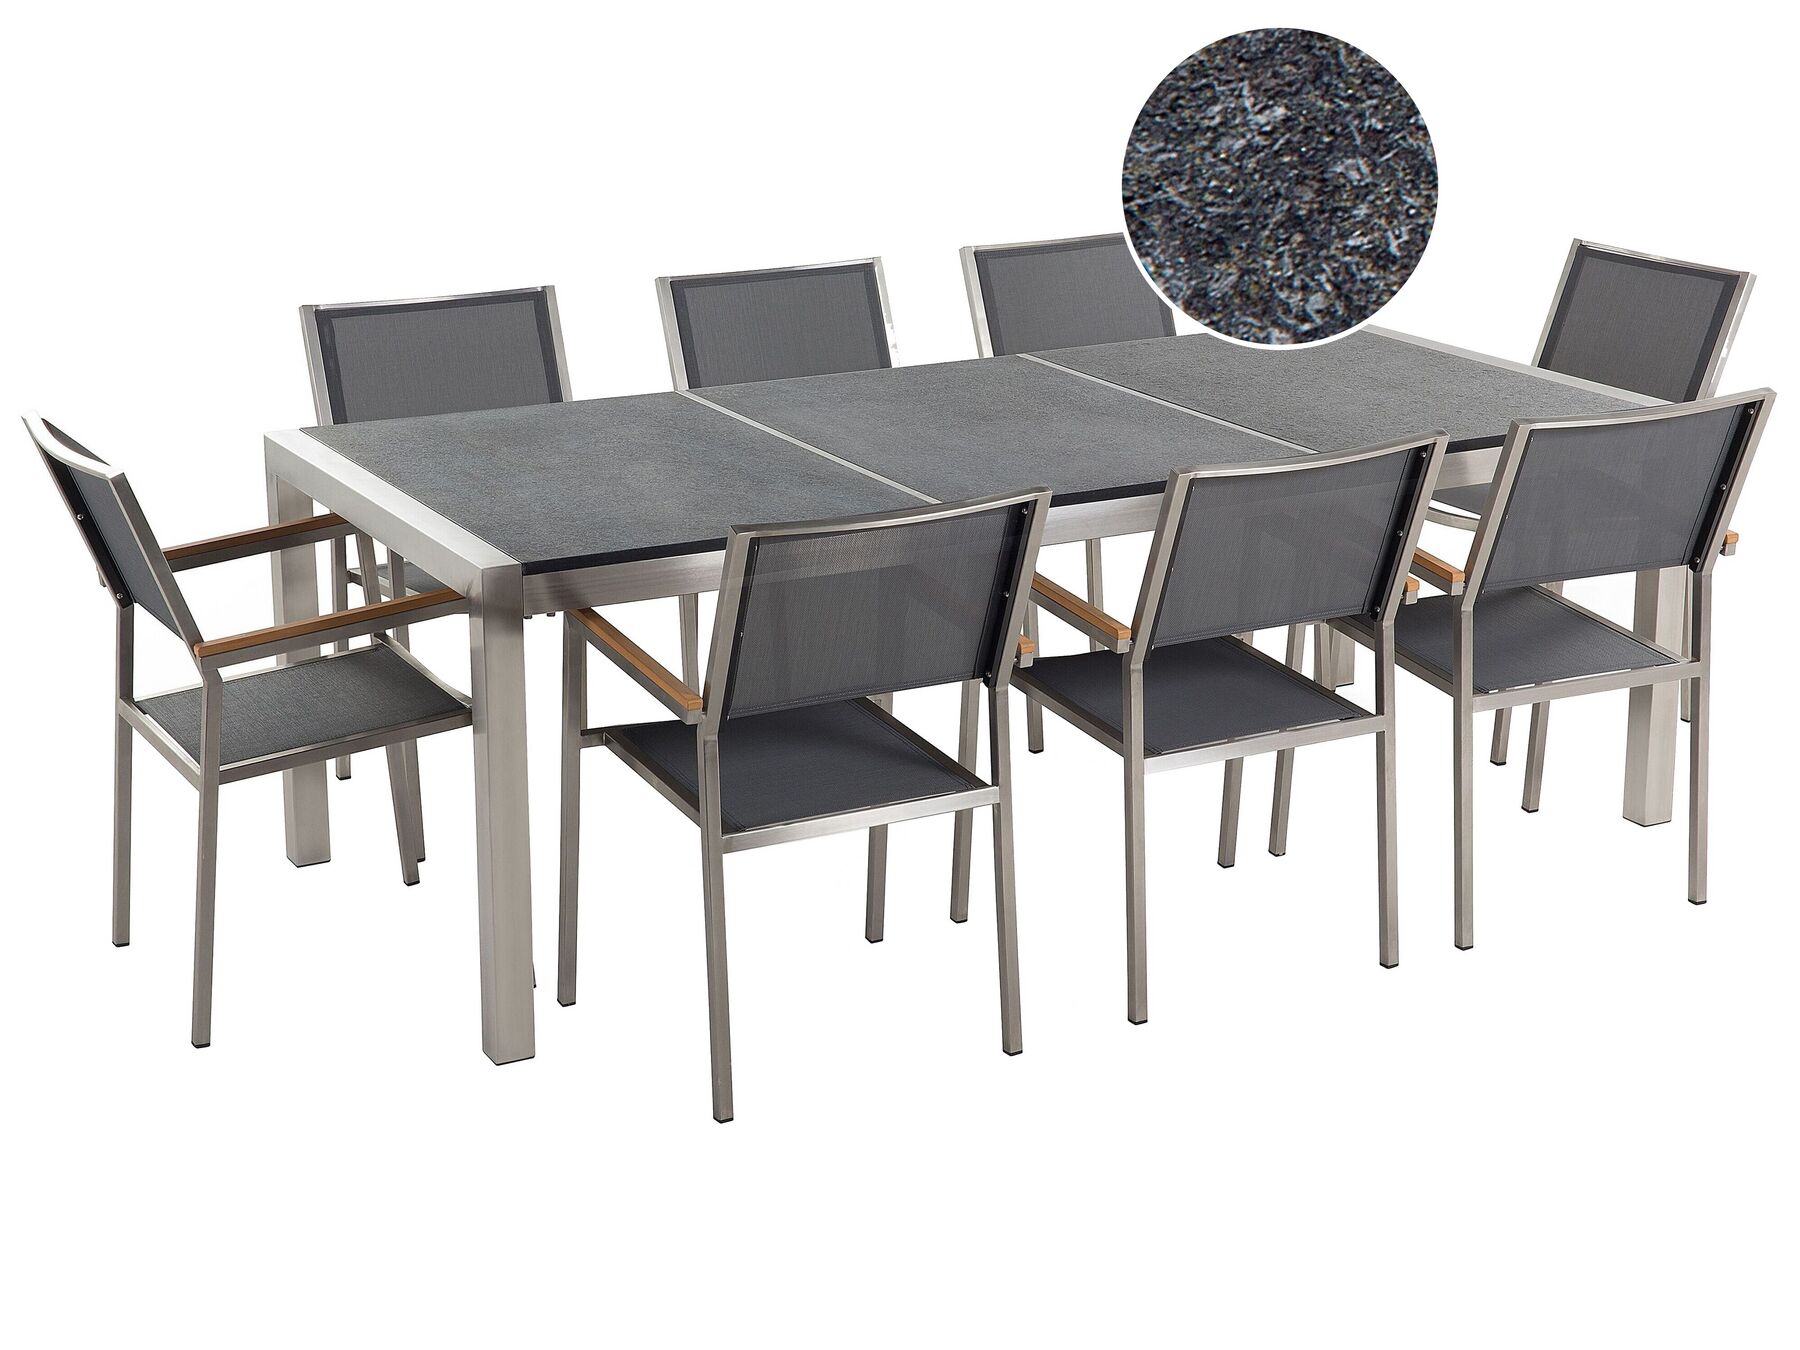 8 Seater Garden Dining Set Black Granite Triple Plate Top with Grey Chairs GROSSETO_380466